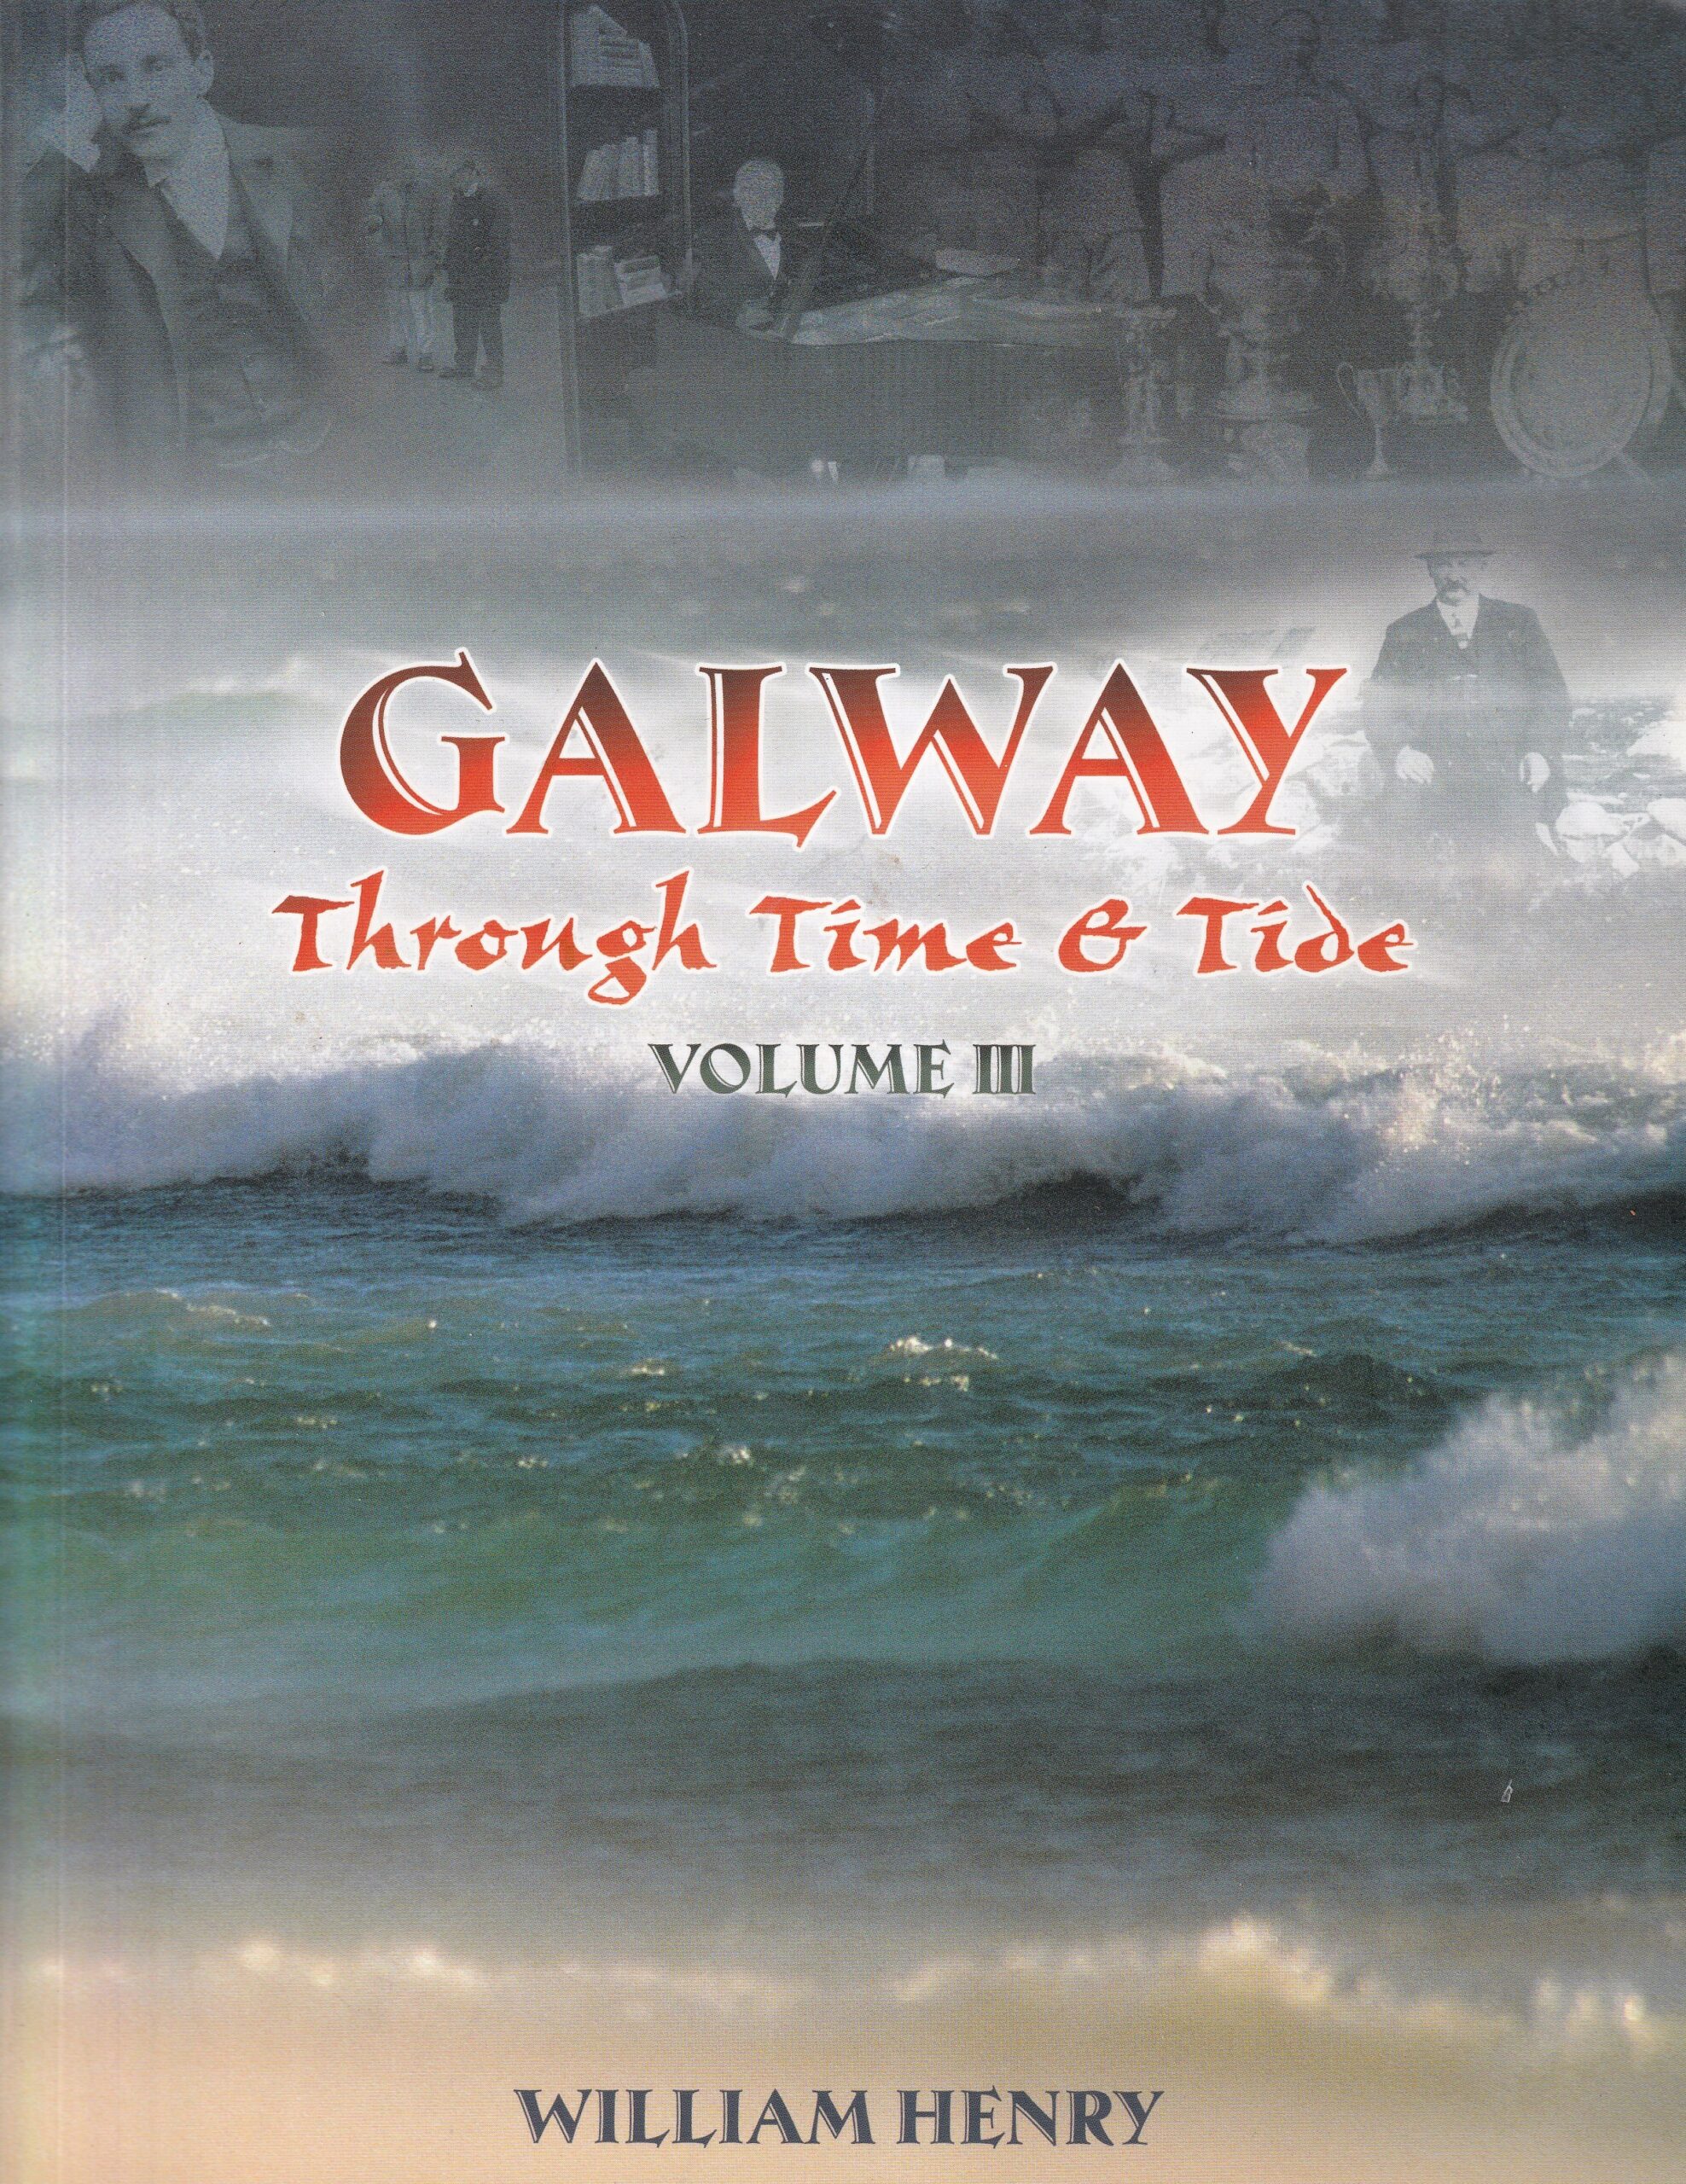 Galway Through Time and Tide Volume III- Signed by William Henry